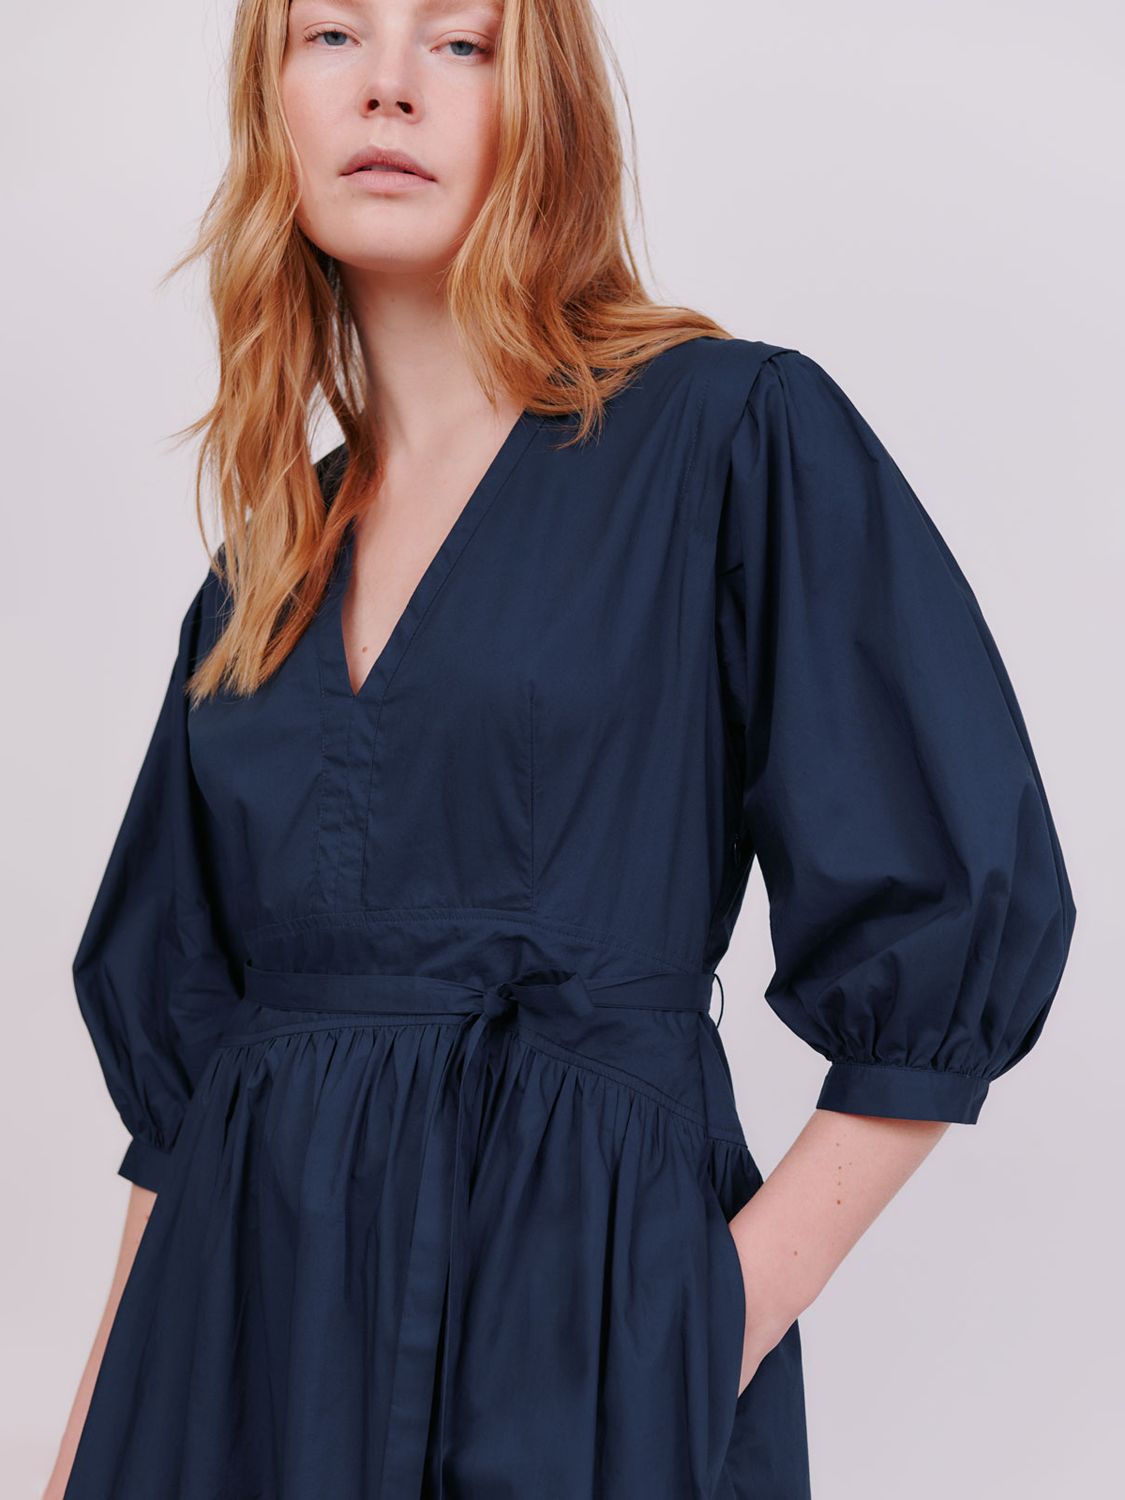 Buy Vivere By Savannah Miller Florence Puff Sleeve Cotton Midi Dress, Navy Online at johnlewis.com